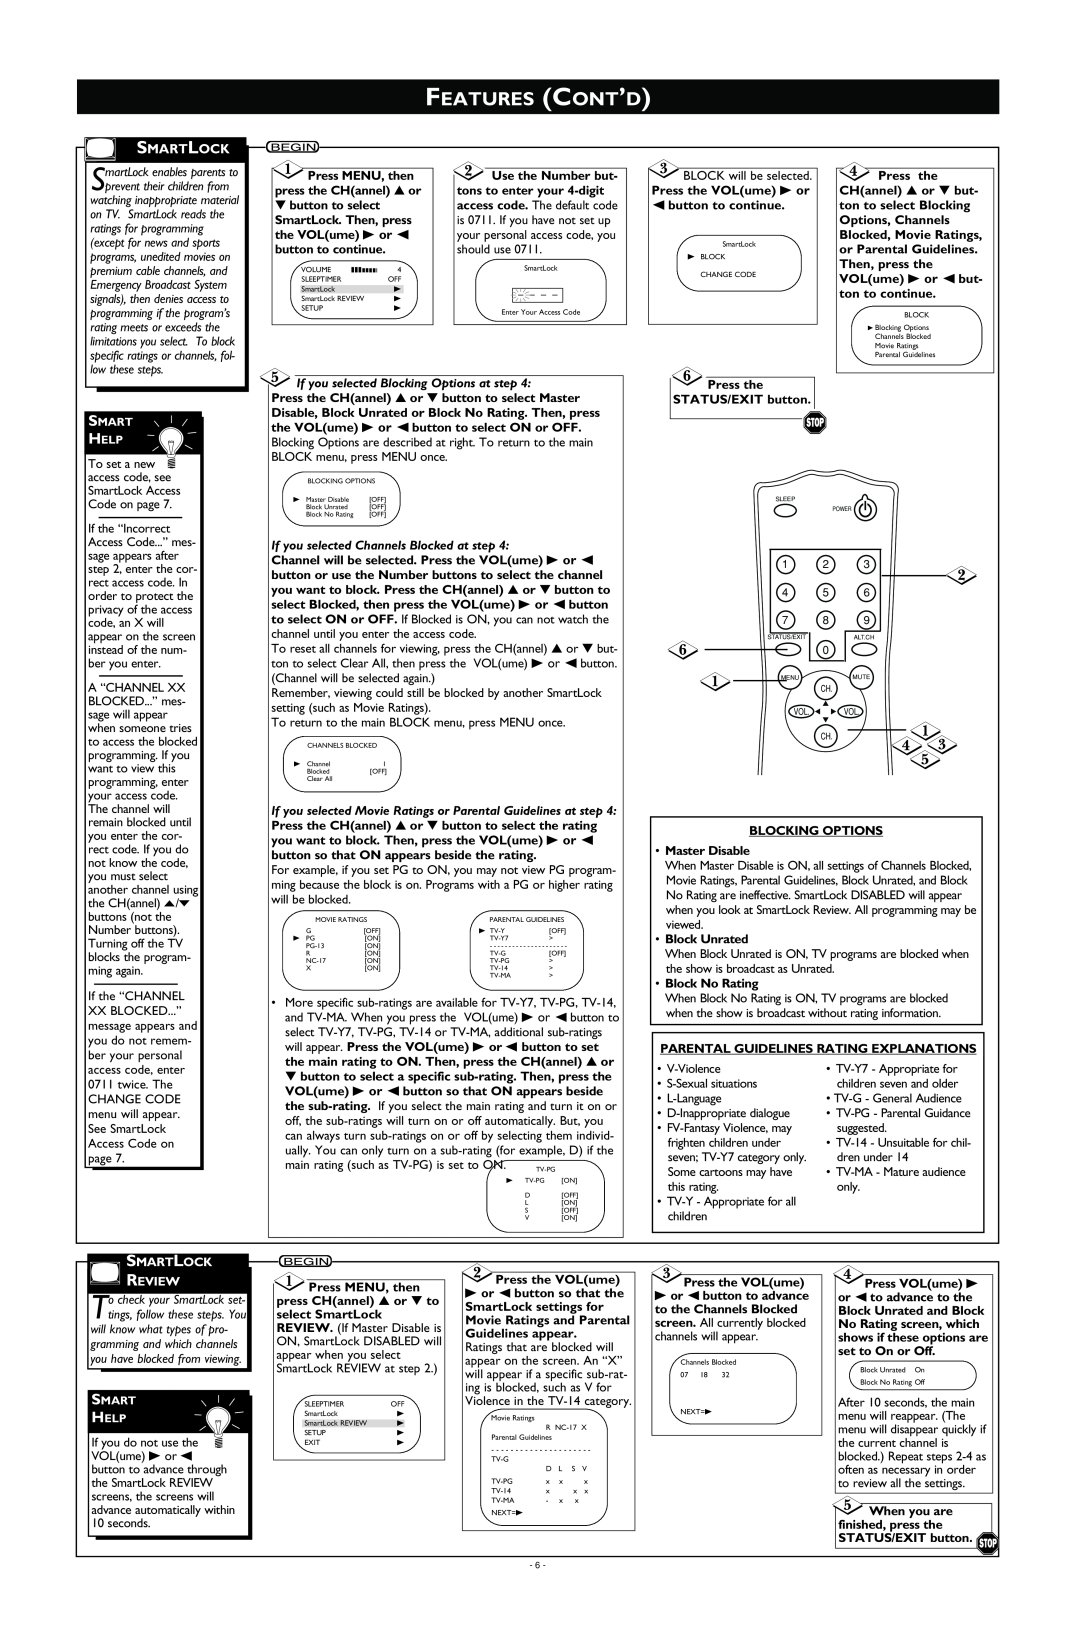 Magnavox MT1905B3 warranty Features Cont’D, low these steps, If you selected Blocking Options at step, Smartlock Review 